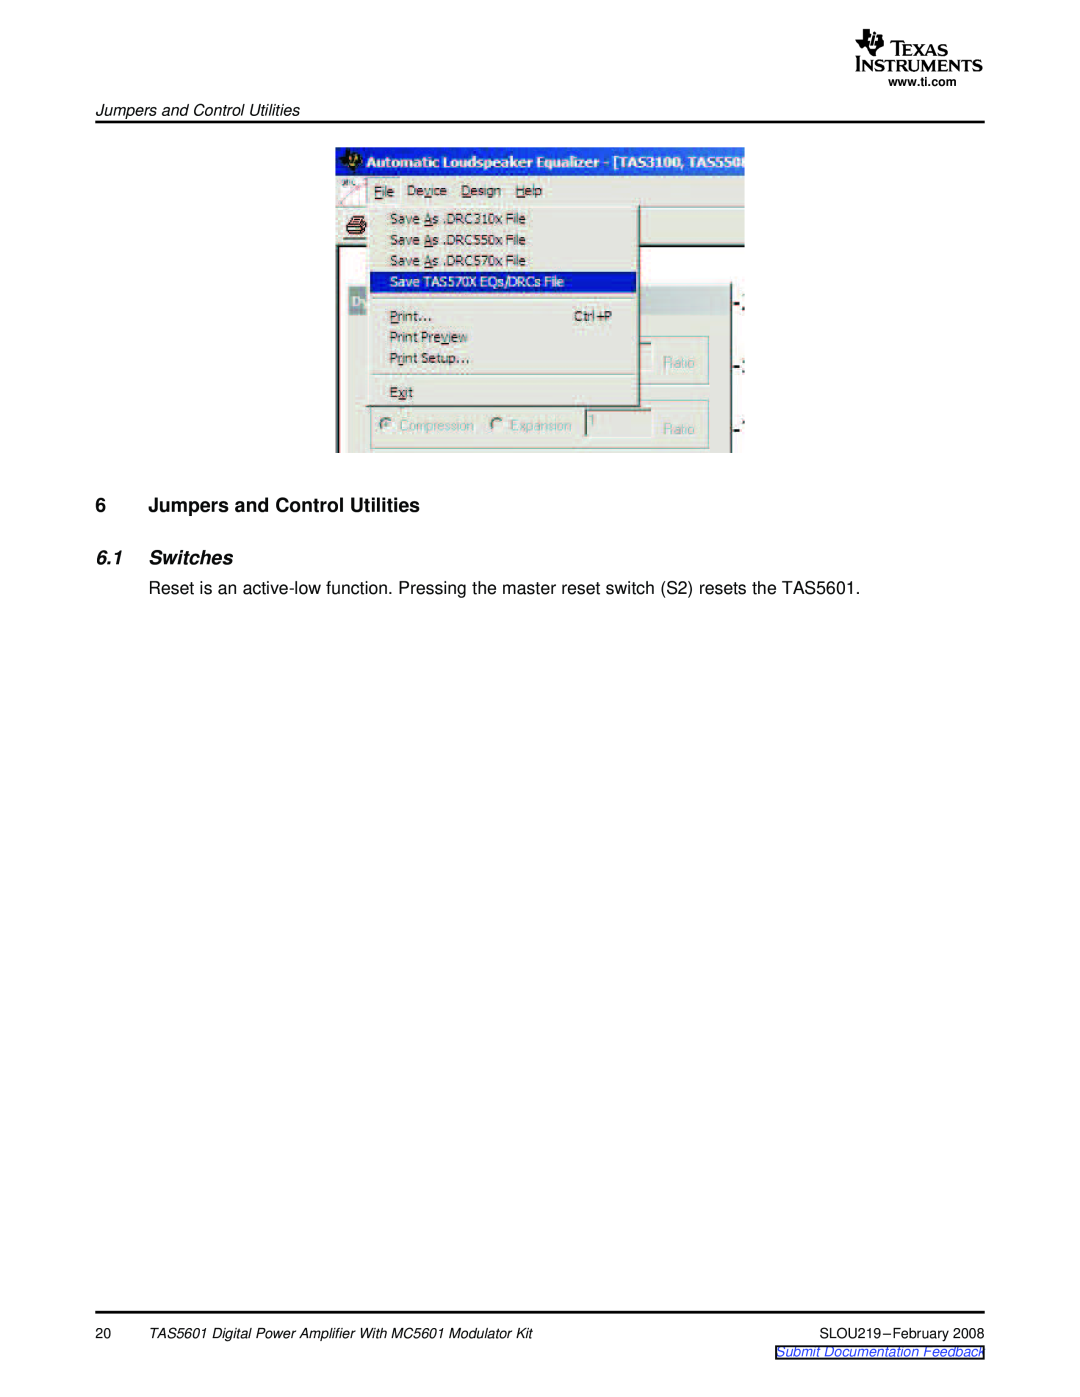 Texas Instruments TAS5601 manual Jumpers and Control Utilities, 6.1Switches, Submit Documentation Feedback 